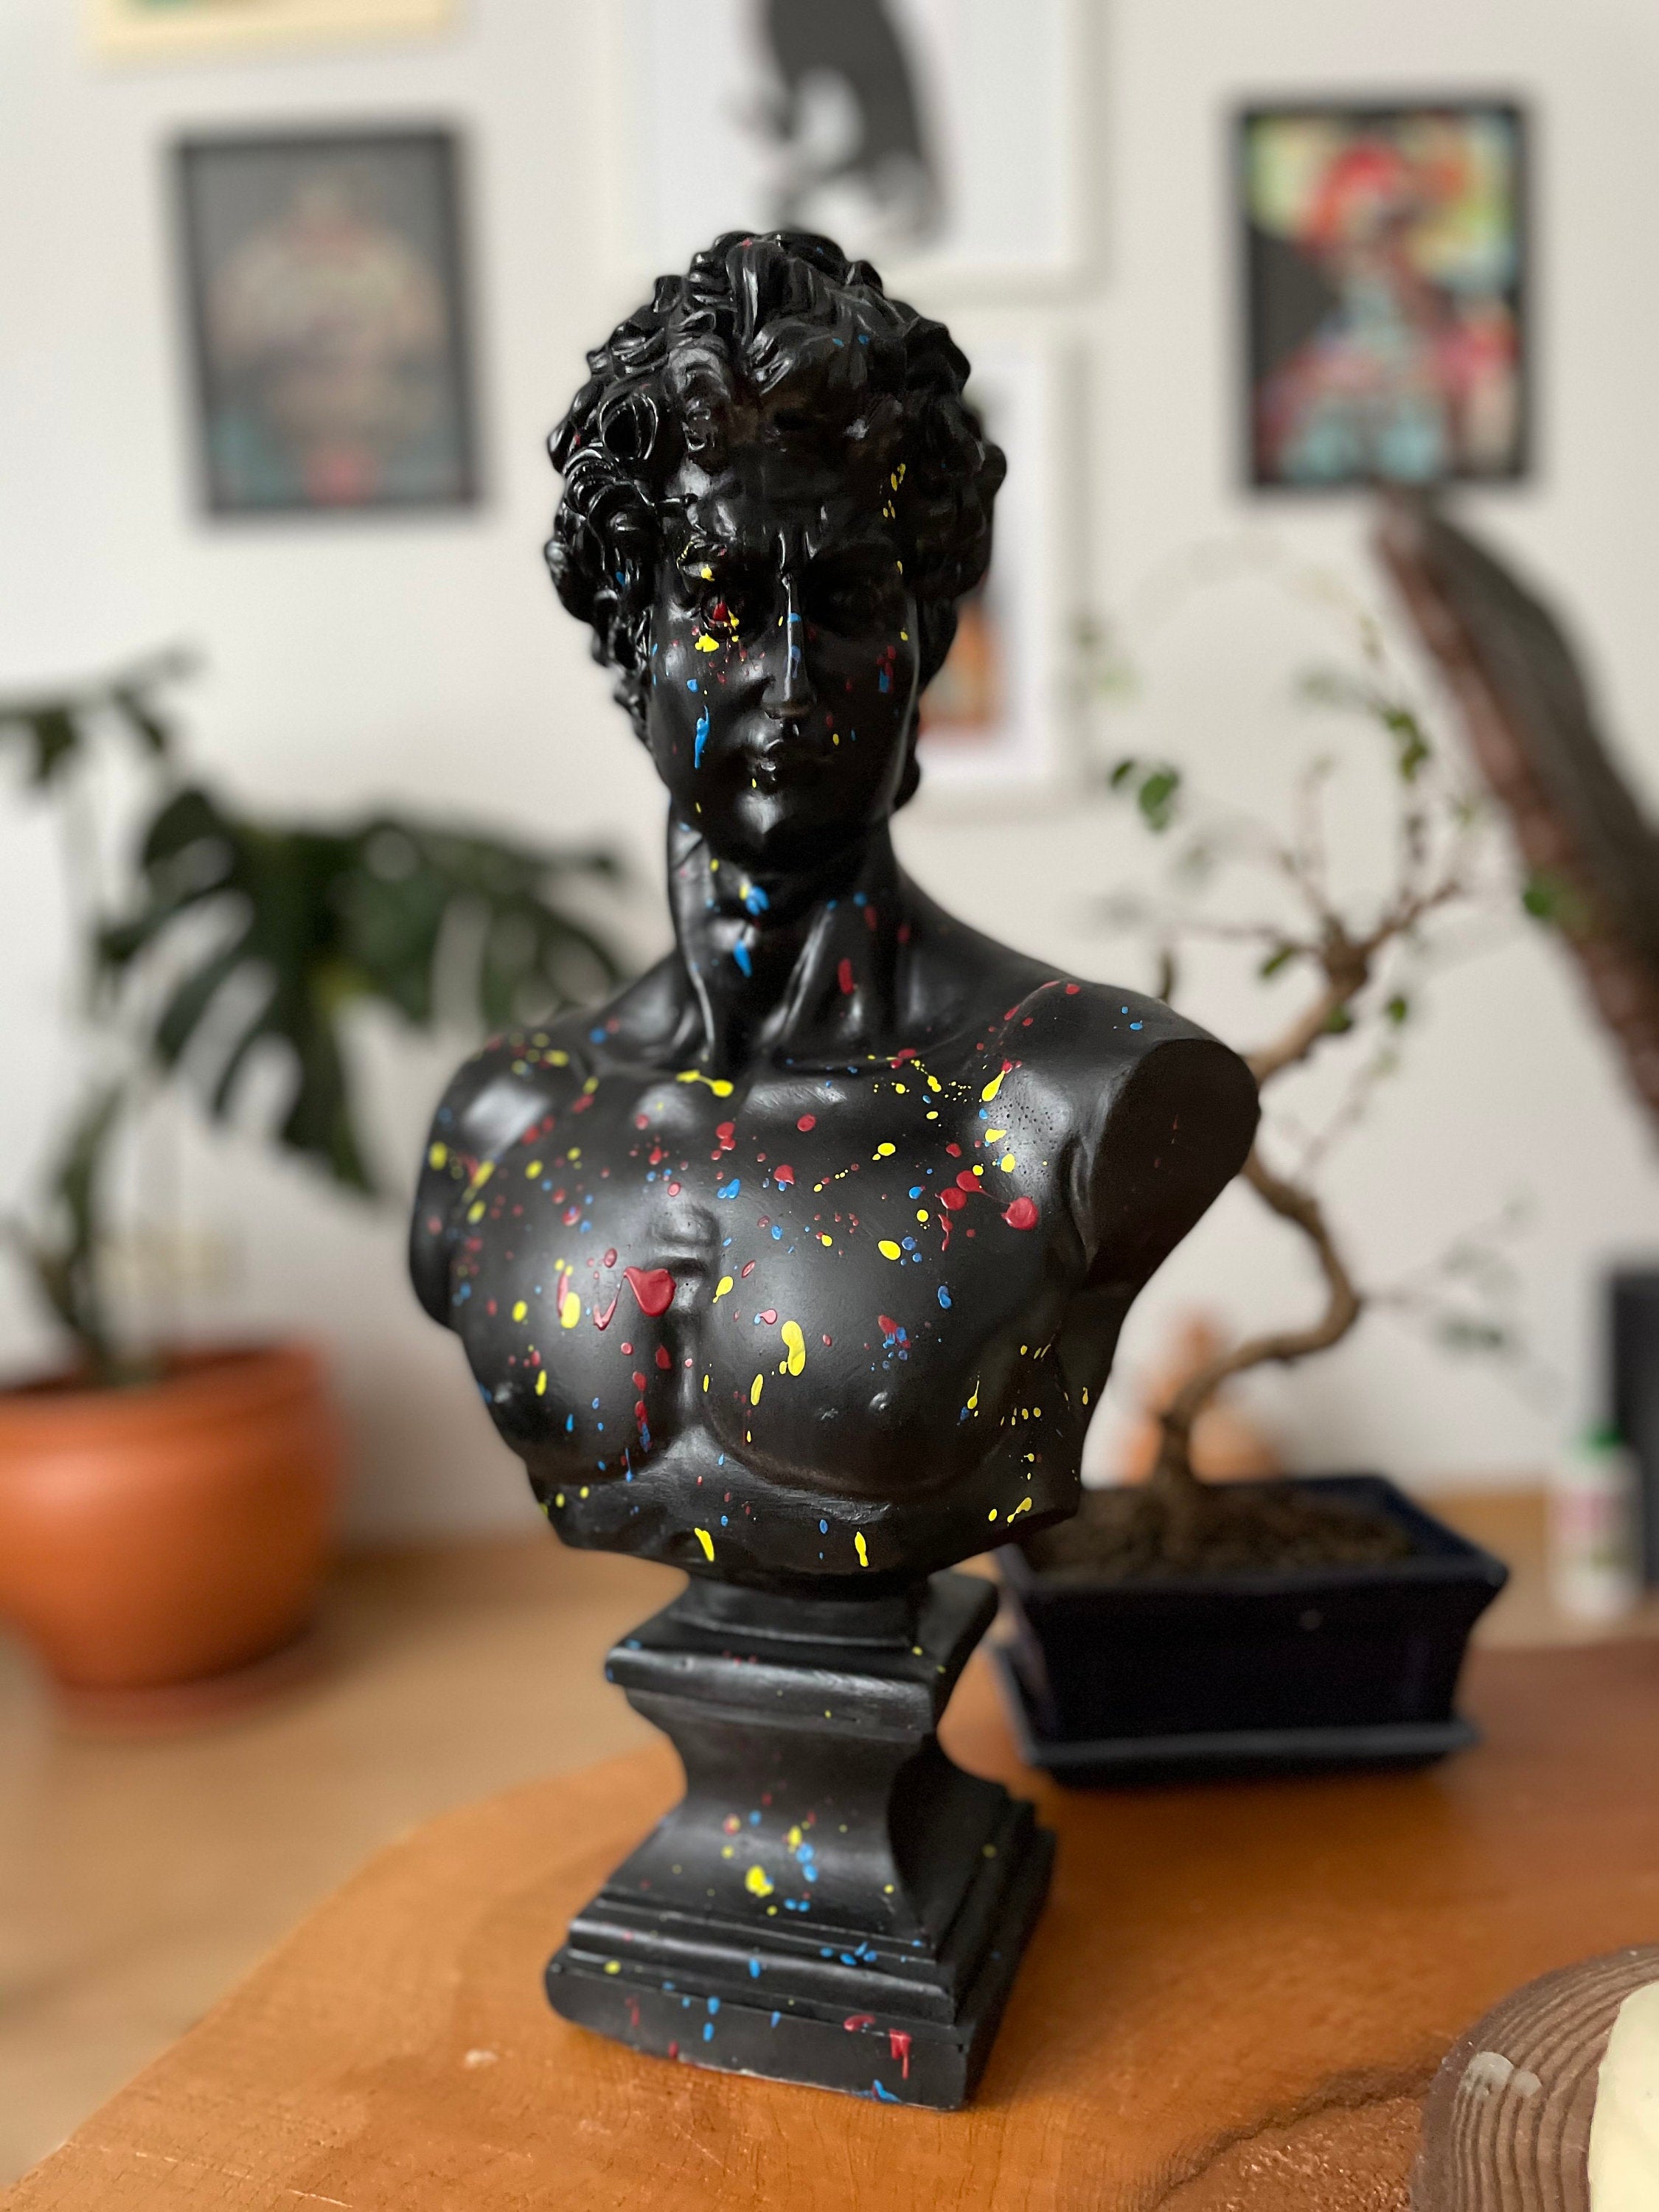 Dynamic Contrasts: Large David Bust Sculpture with Colorful Strips